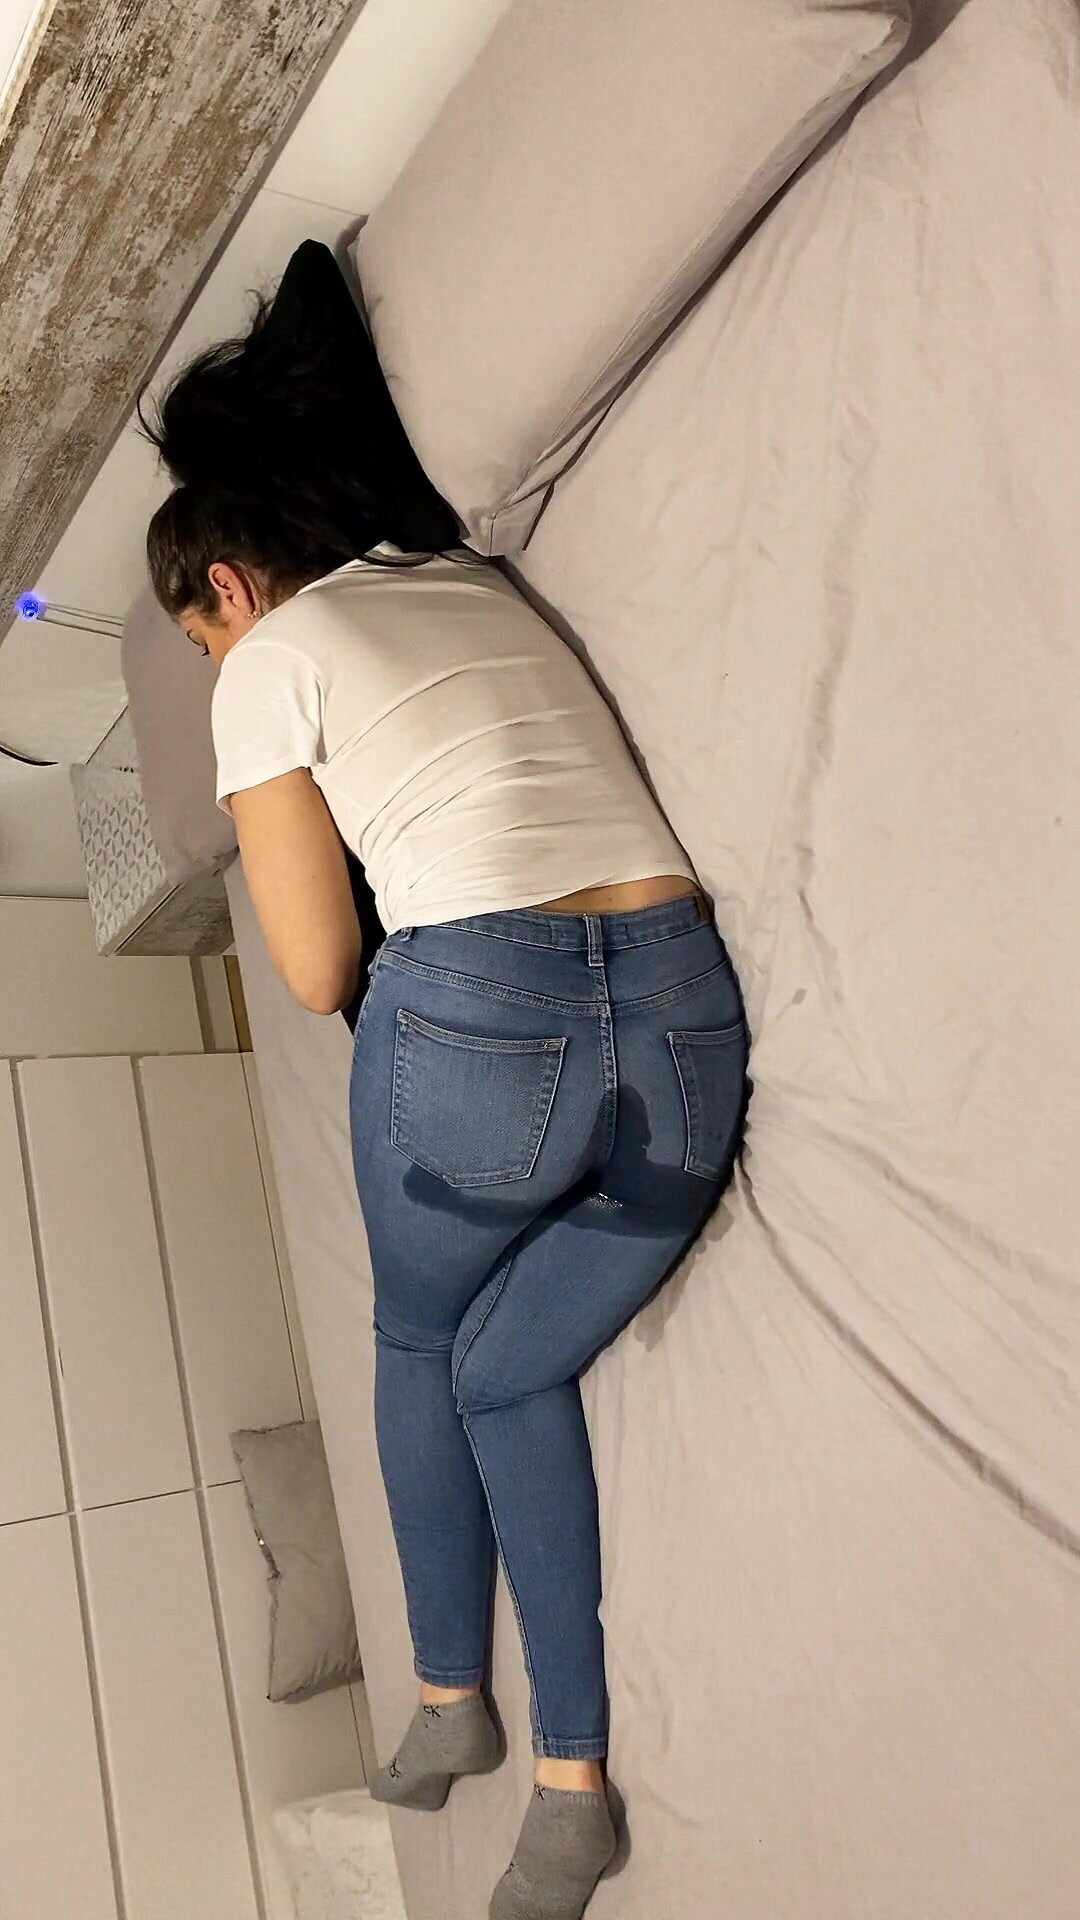 Milf Gets Wet In Jeans On Bed